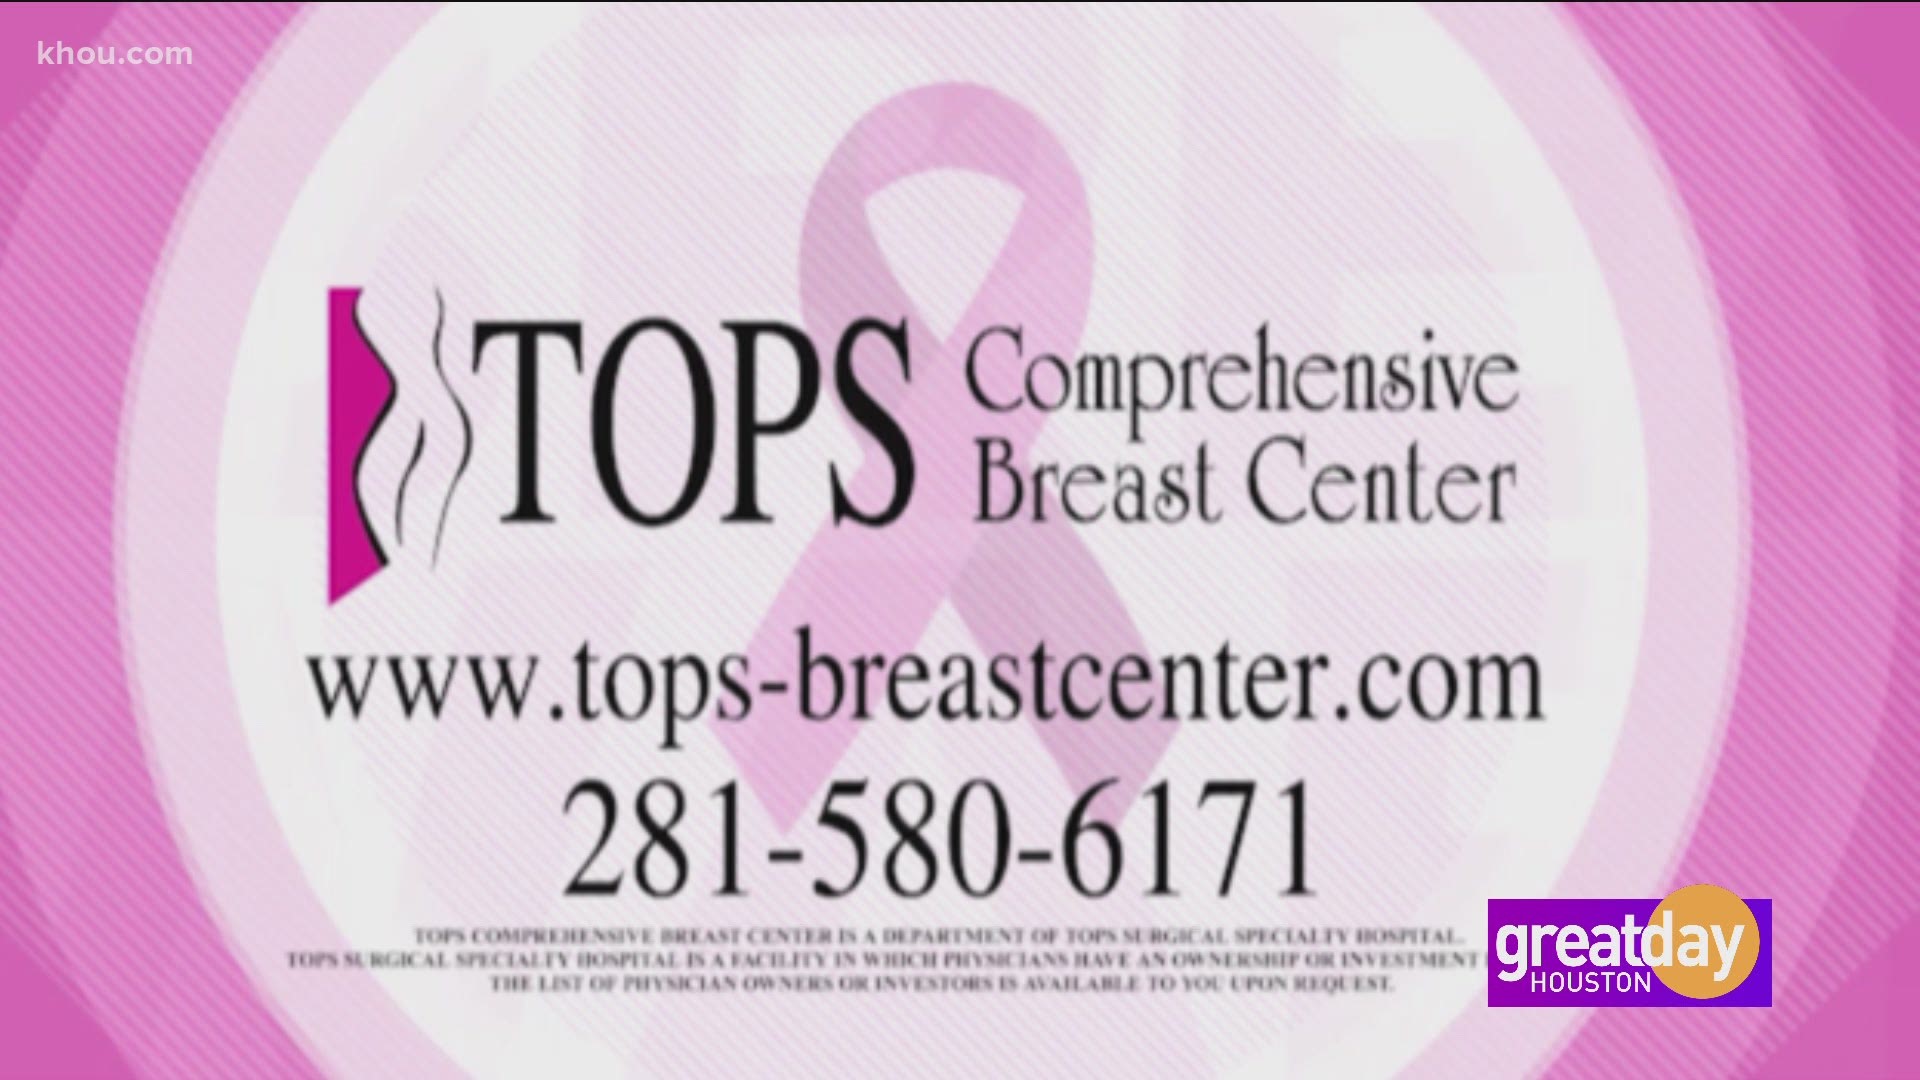 Dr. Stephen Rose, Medical Director with Tops Comprehensive Breast Center shares the latest technology for mammograms to help beat and survive breast cancer.